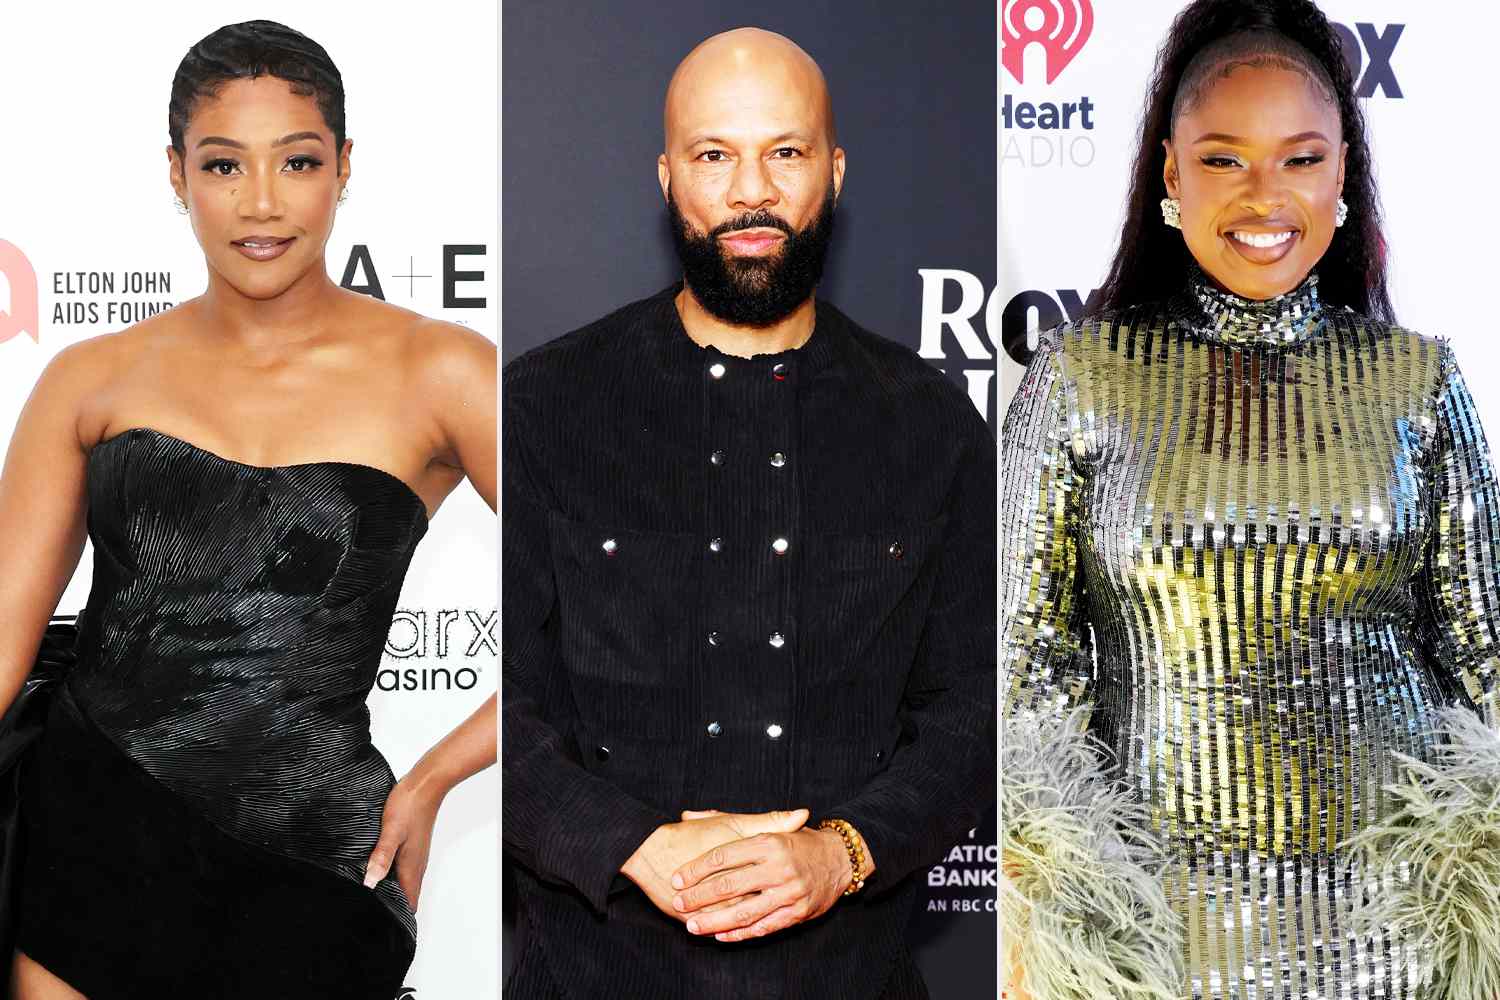 Tiffany Haddish Reacts to Ex Common Saying He'd Marry Jennifer Hudson: 'I Hope They Actually' Do